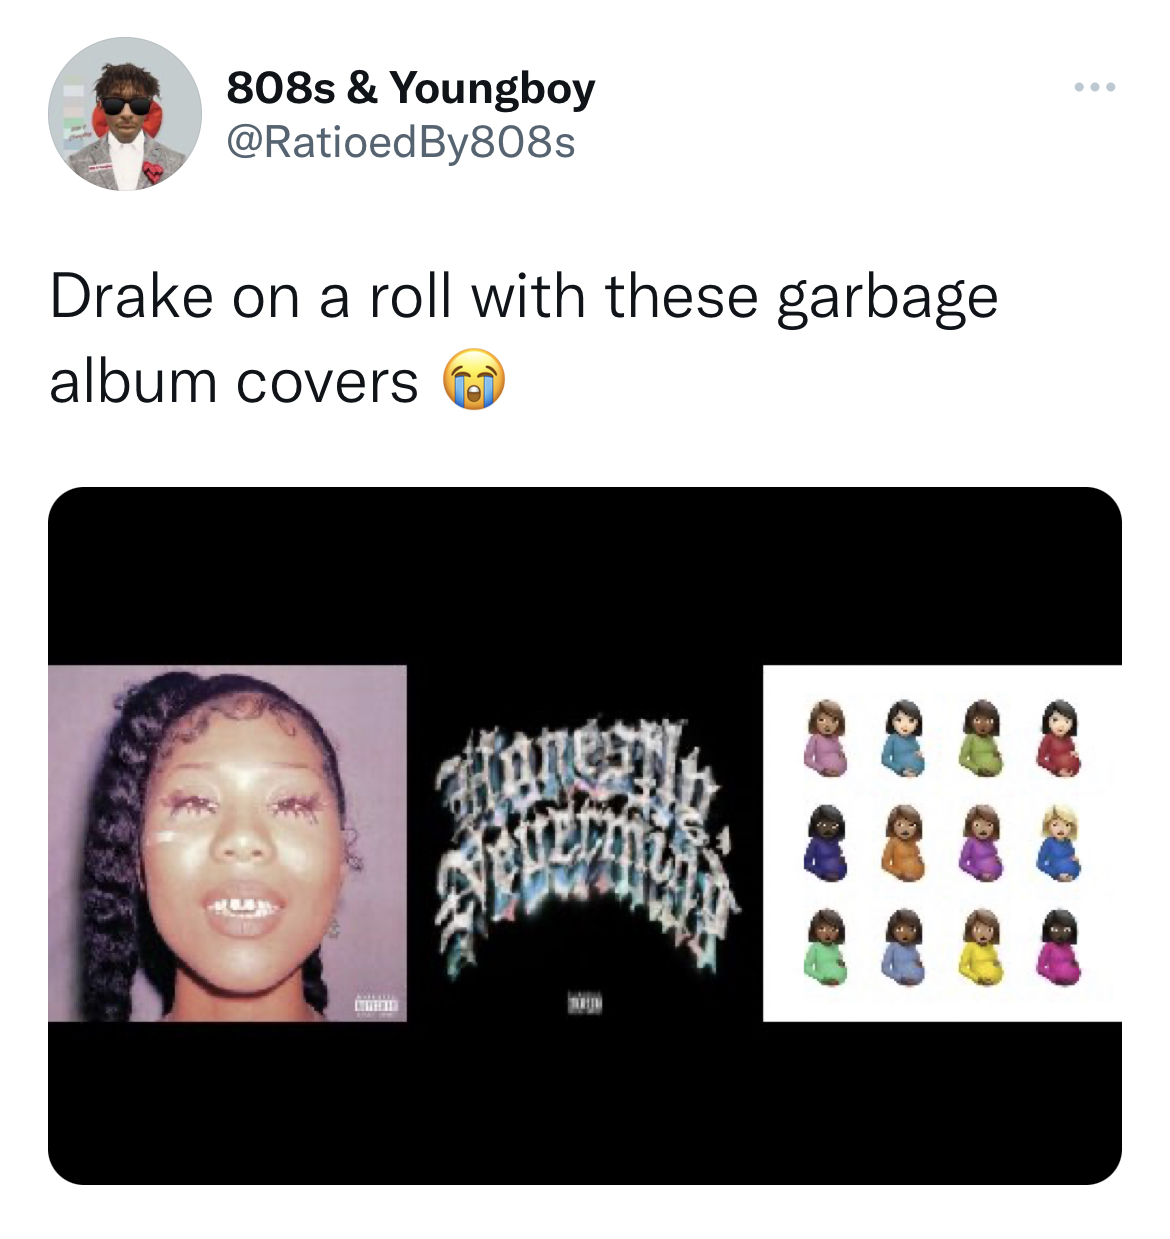 tweets roasting celebs - communication - 808s & Youngboy Drake on a roll with these garbage album covers